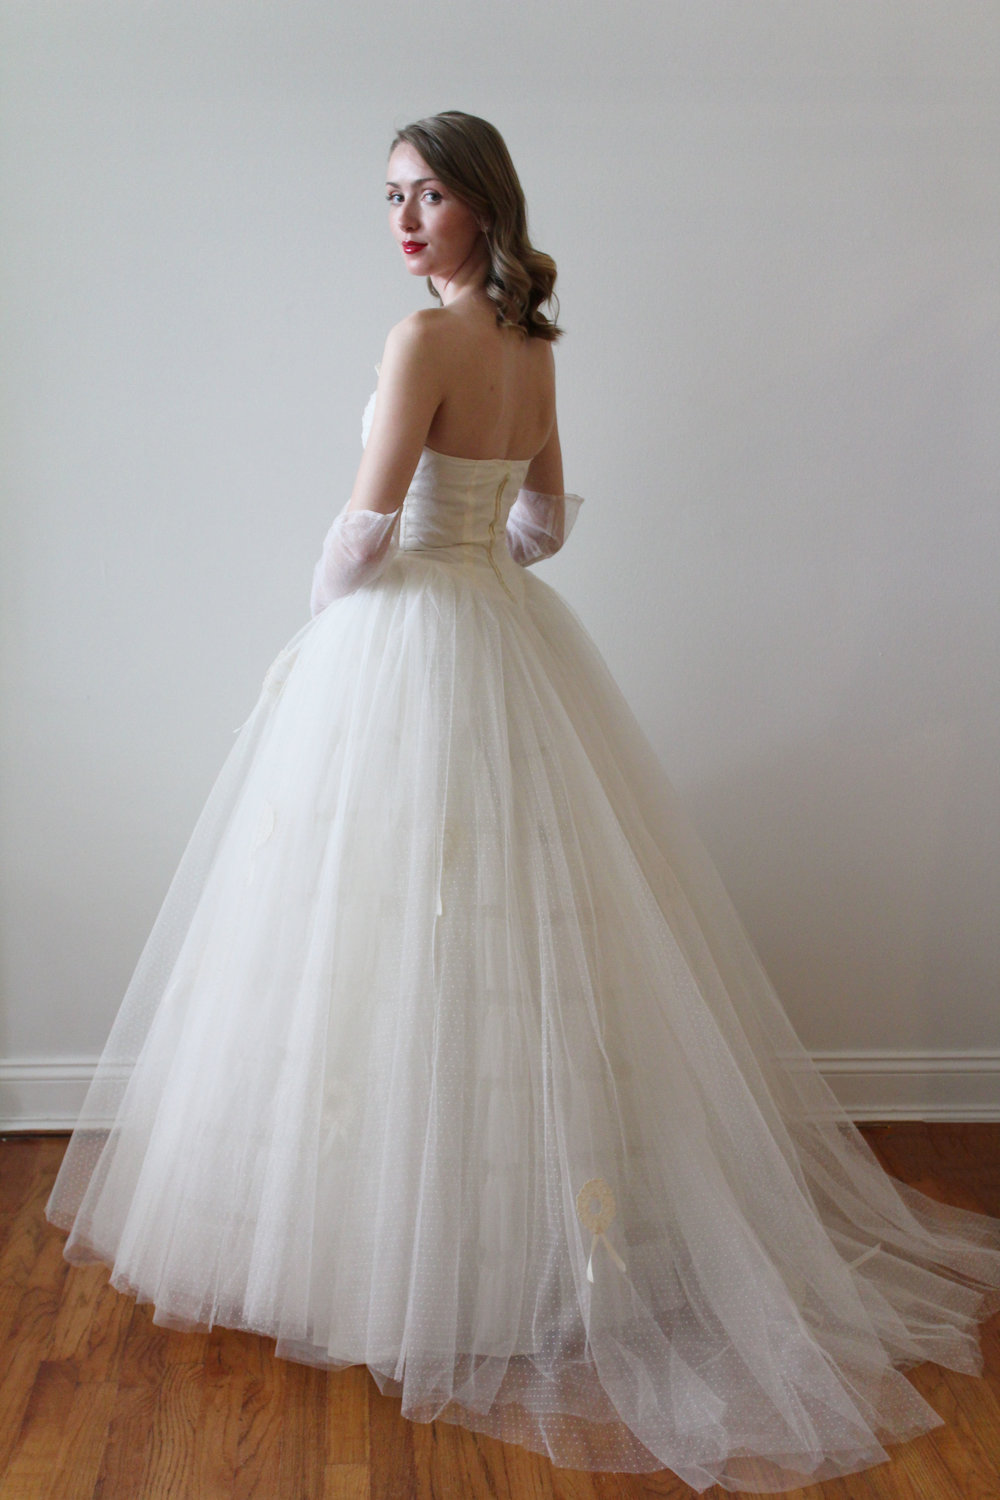 How To Add Tulle To A Dress